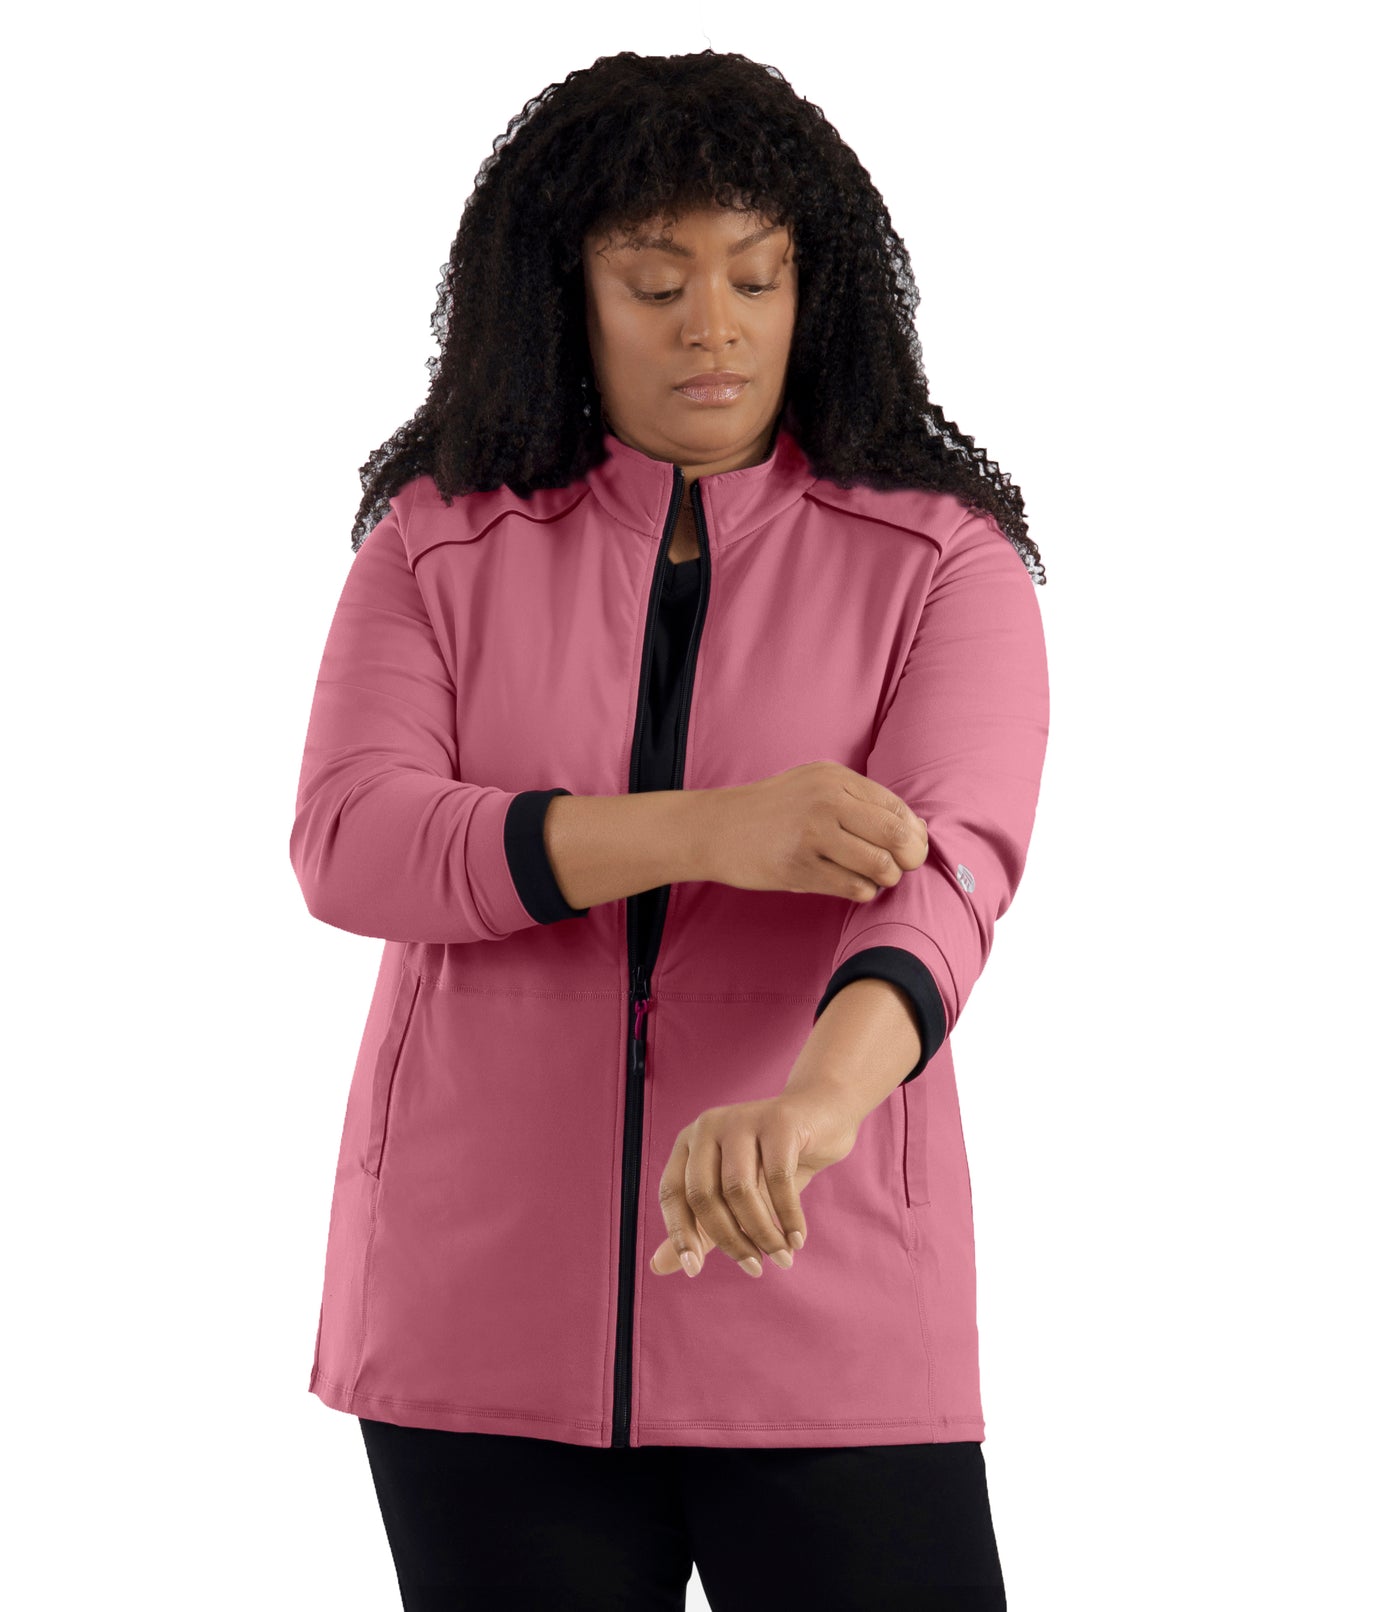 JunoActive's Plus size model wearing JunoStretch Mock Neck Jacket in Warm Mauve with black accents. Model is facing front rolling up sleeves.